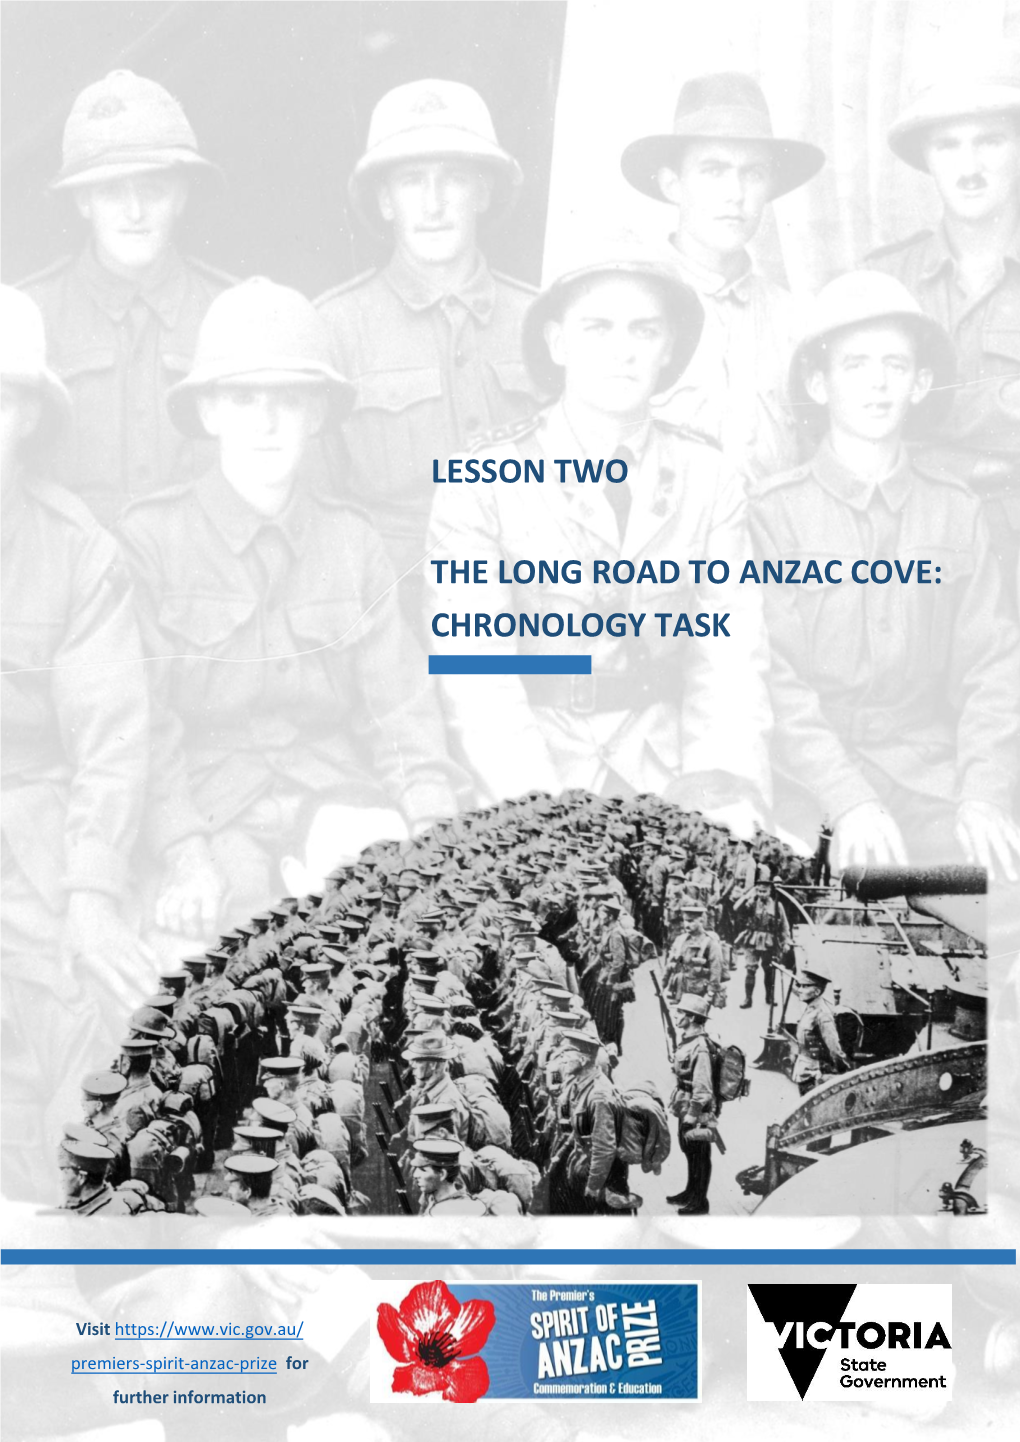 The Long Road to Anzac Cove: Chronology Task Lesson